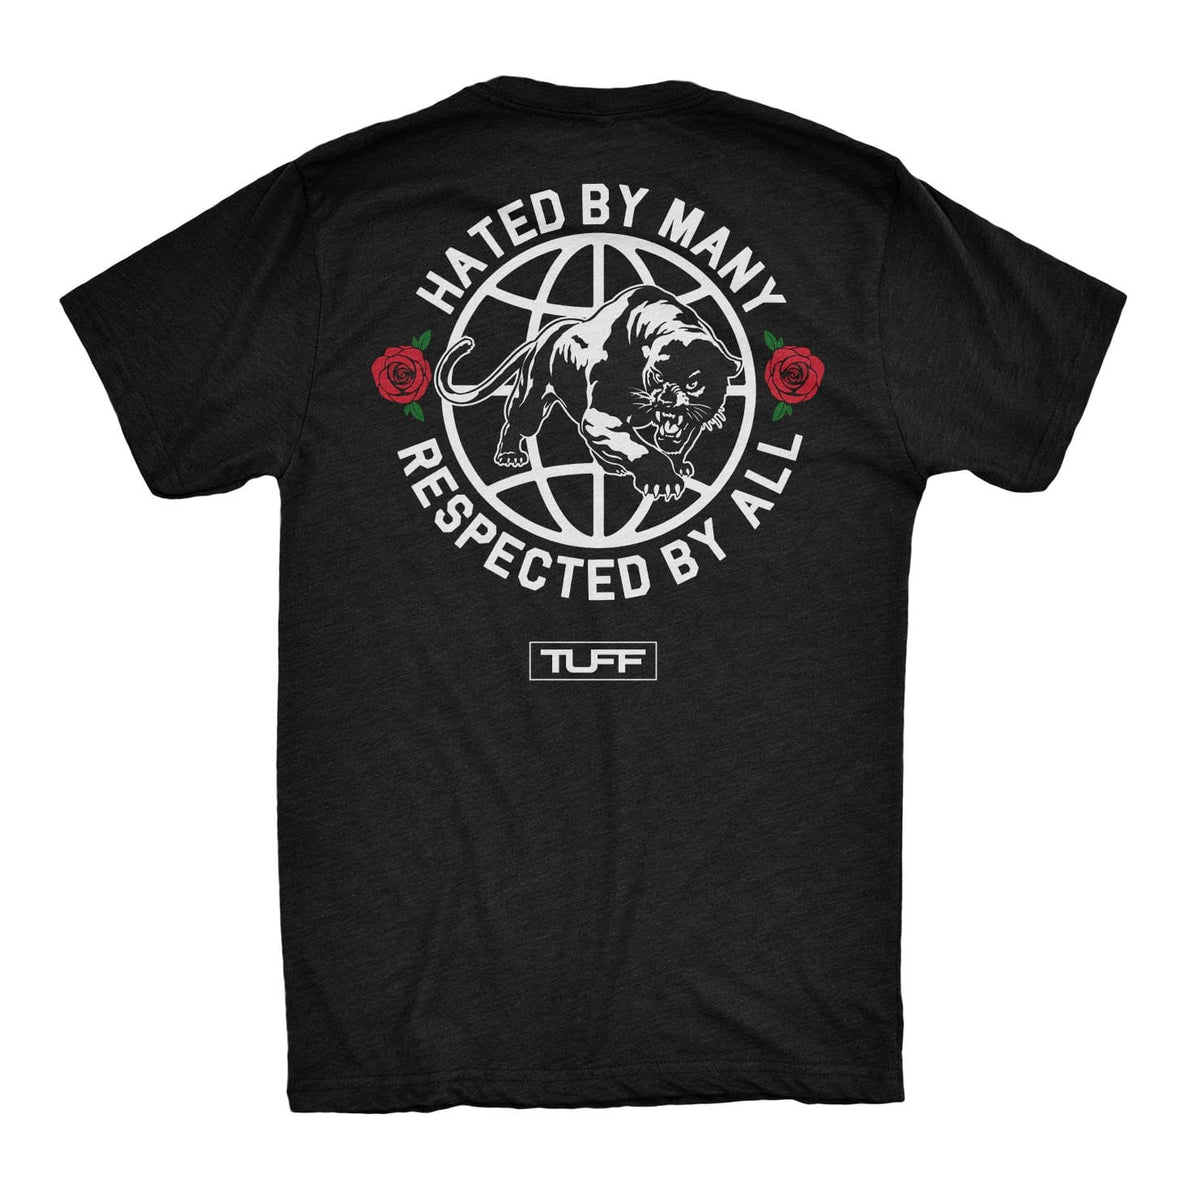 Hated By Many, Respected By All Tee T-shirt